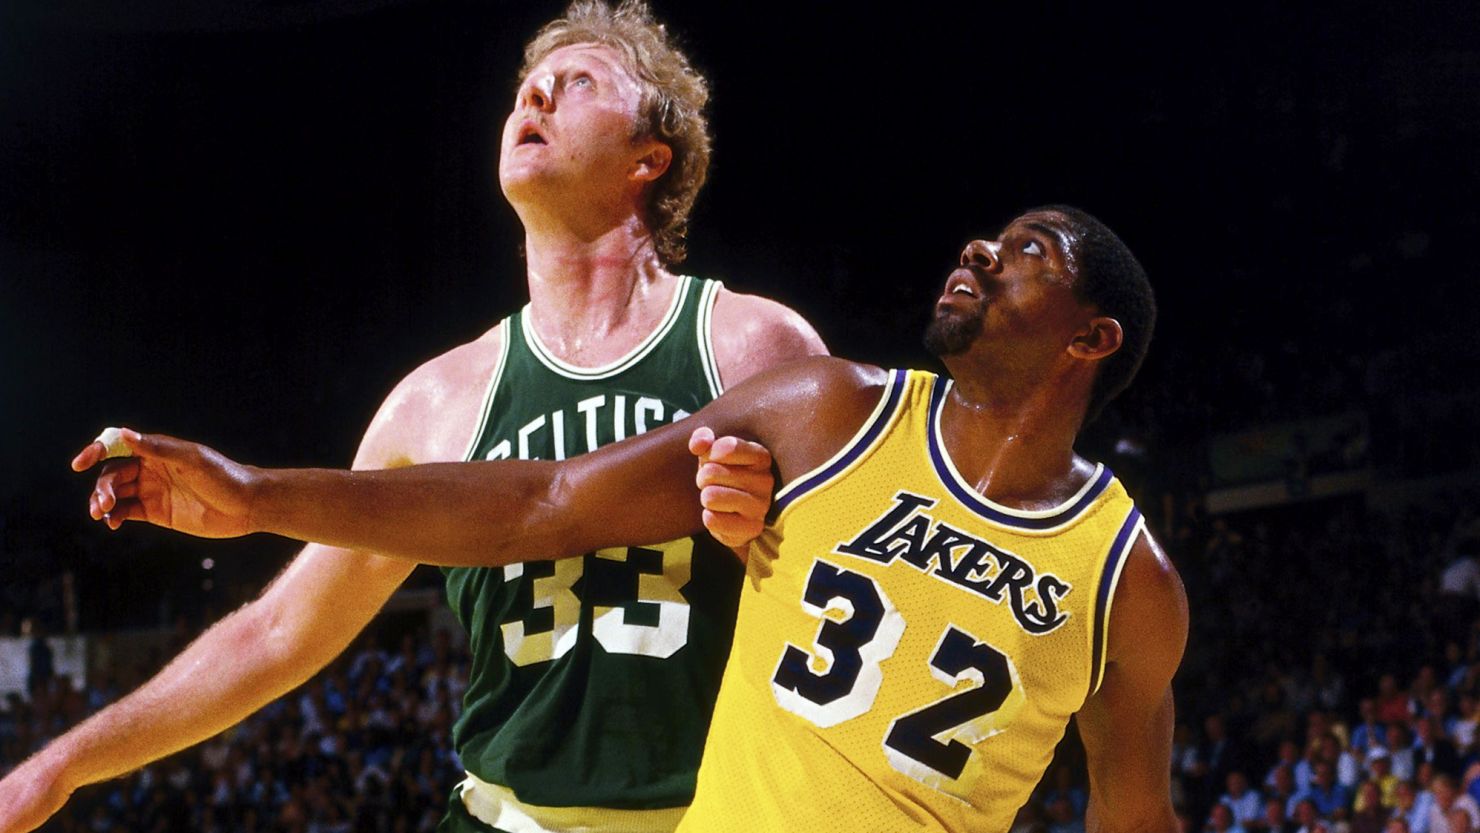 'Celtics/Lakers: Best of Enemies' is an ESPN '30 for 30' documentary that looks at NBA's greatest rivalry.